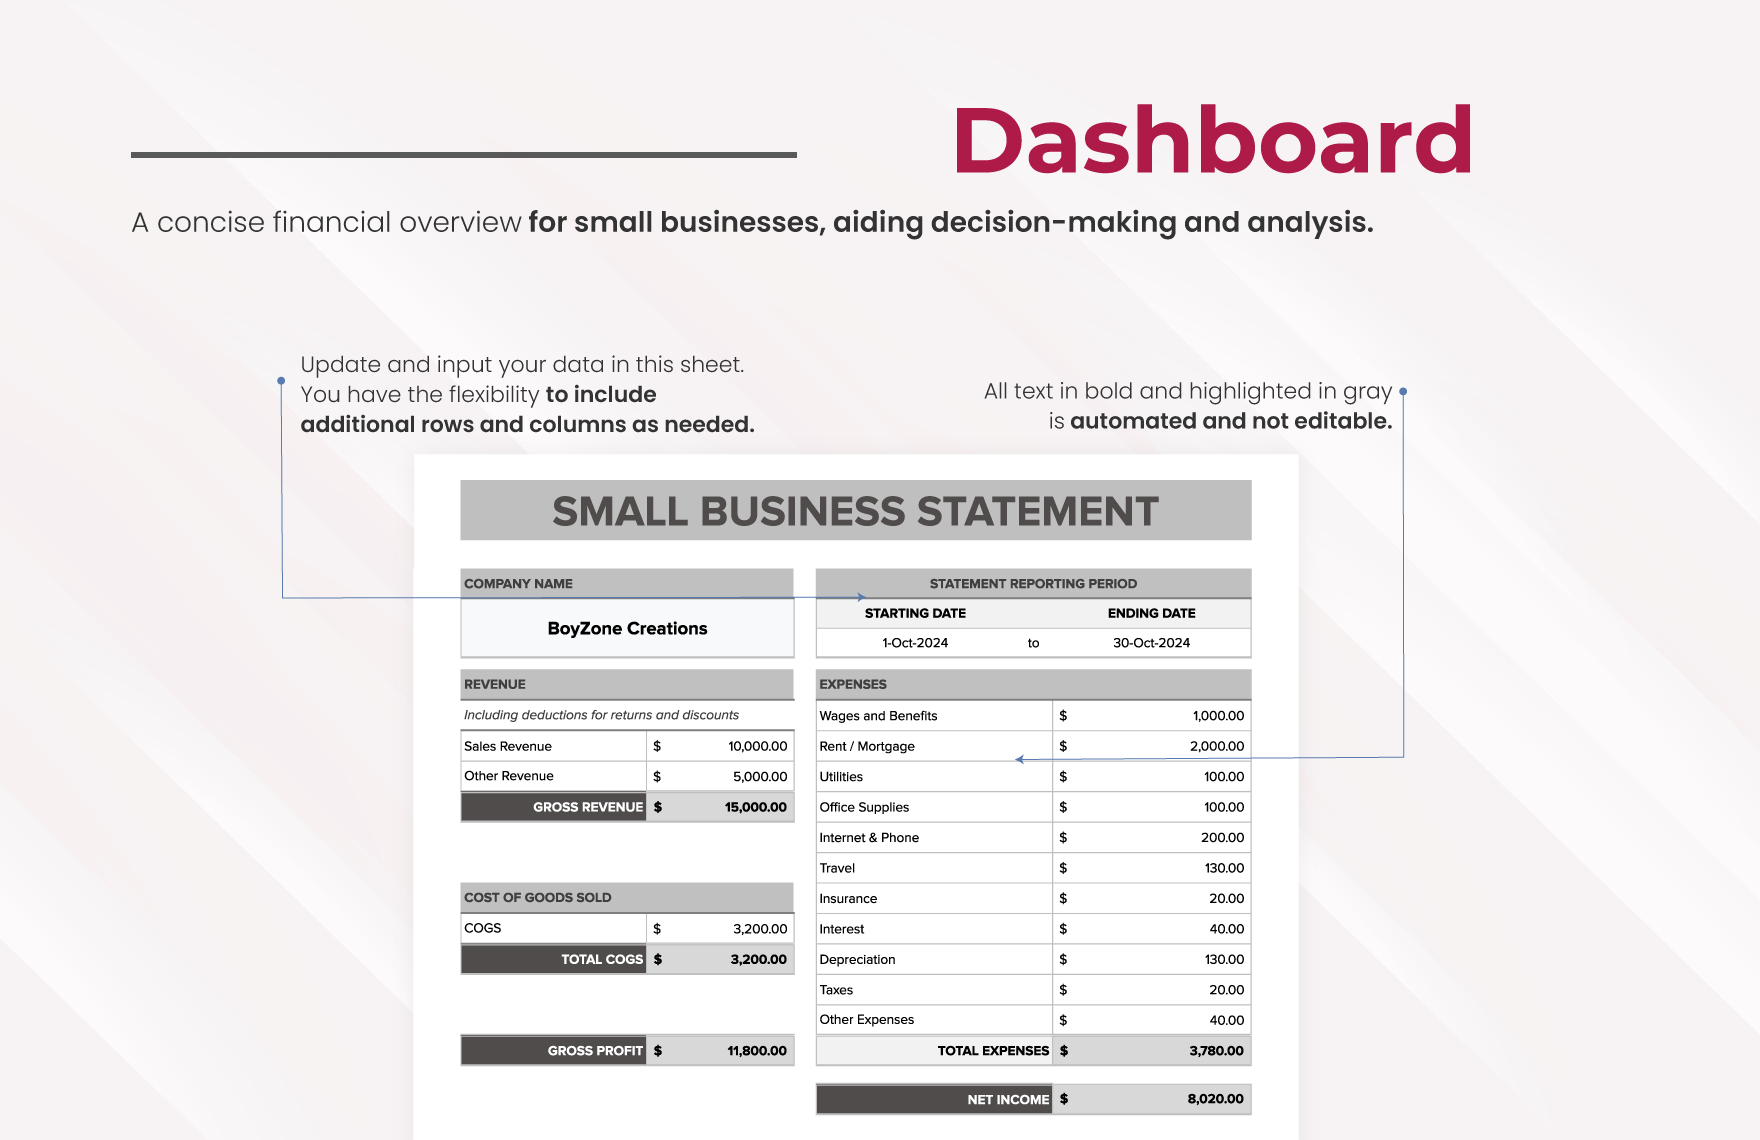 Small Business Statement Template